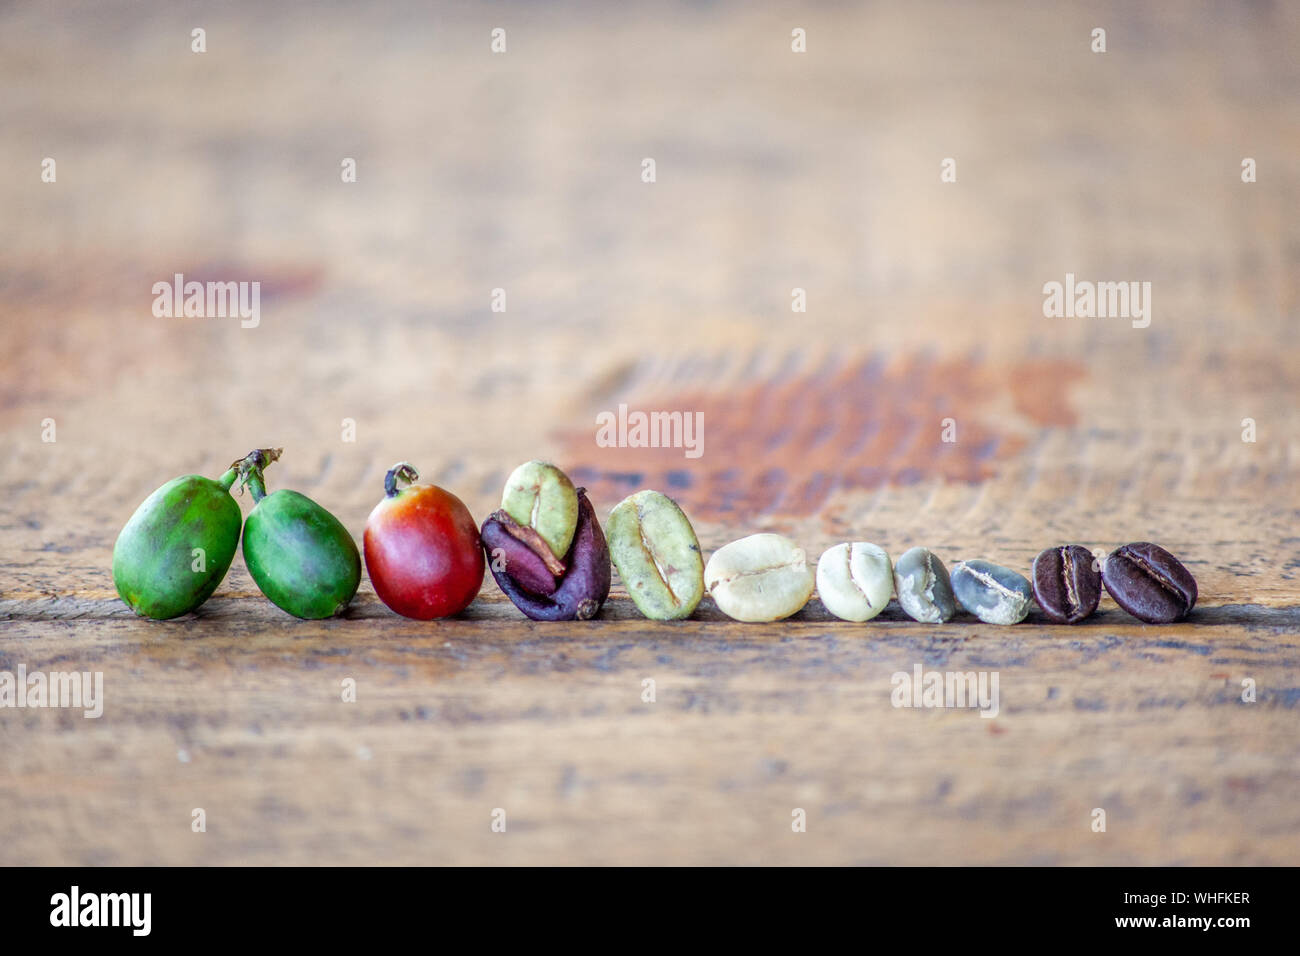 The stages of the coffee bean from fruit to roasted bean Stock Photo